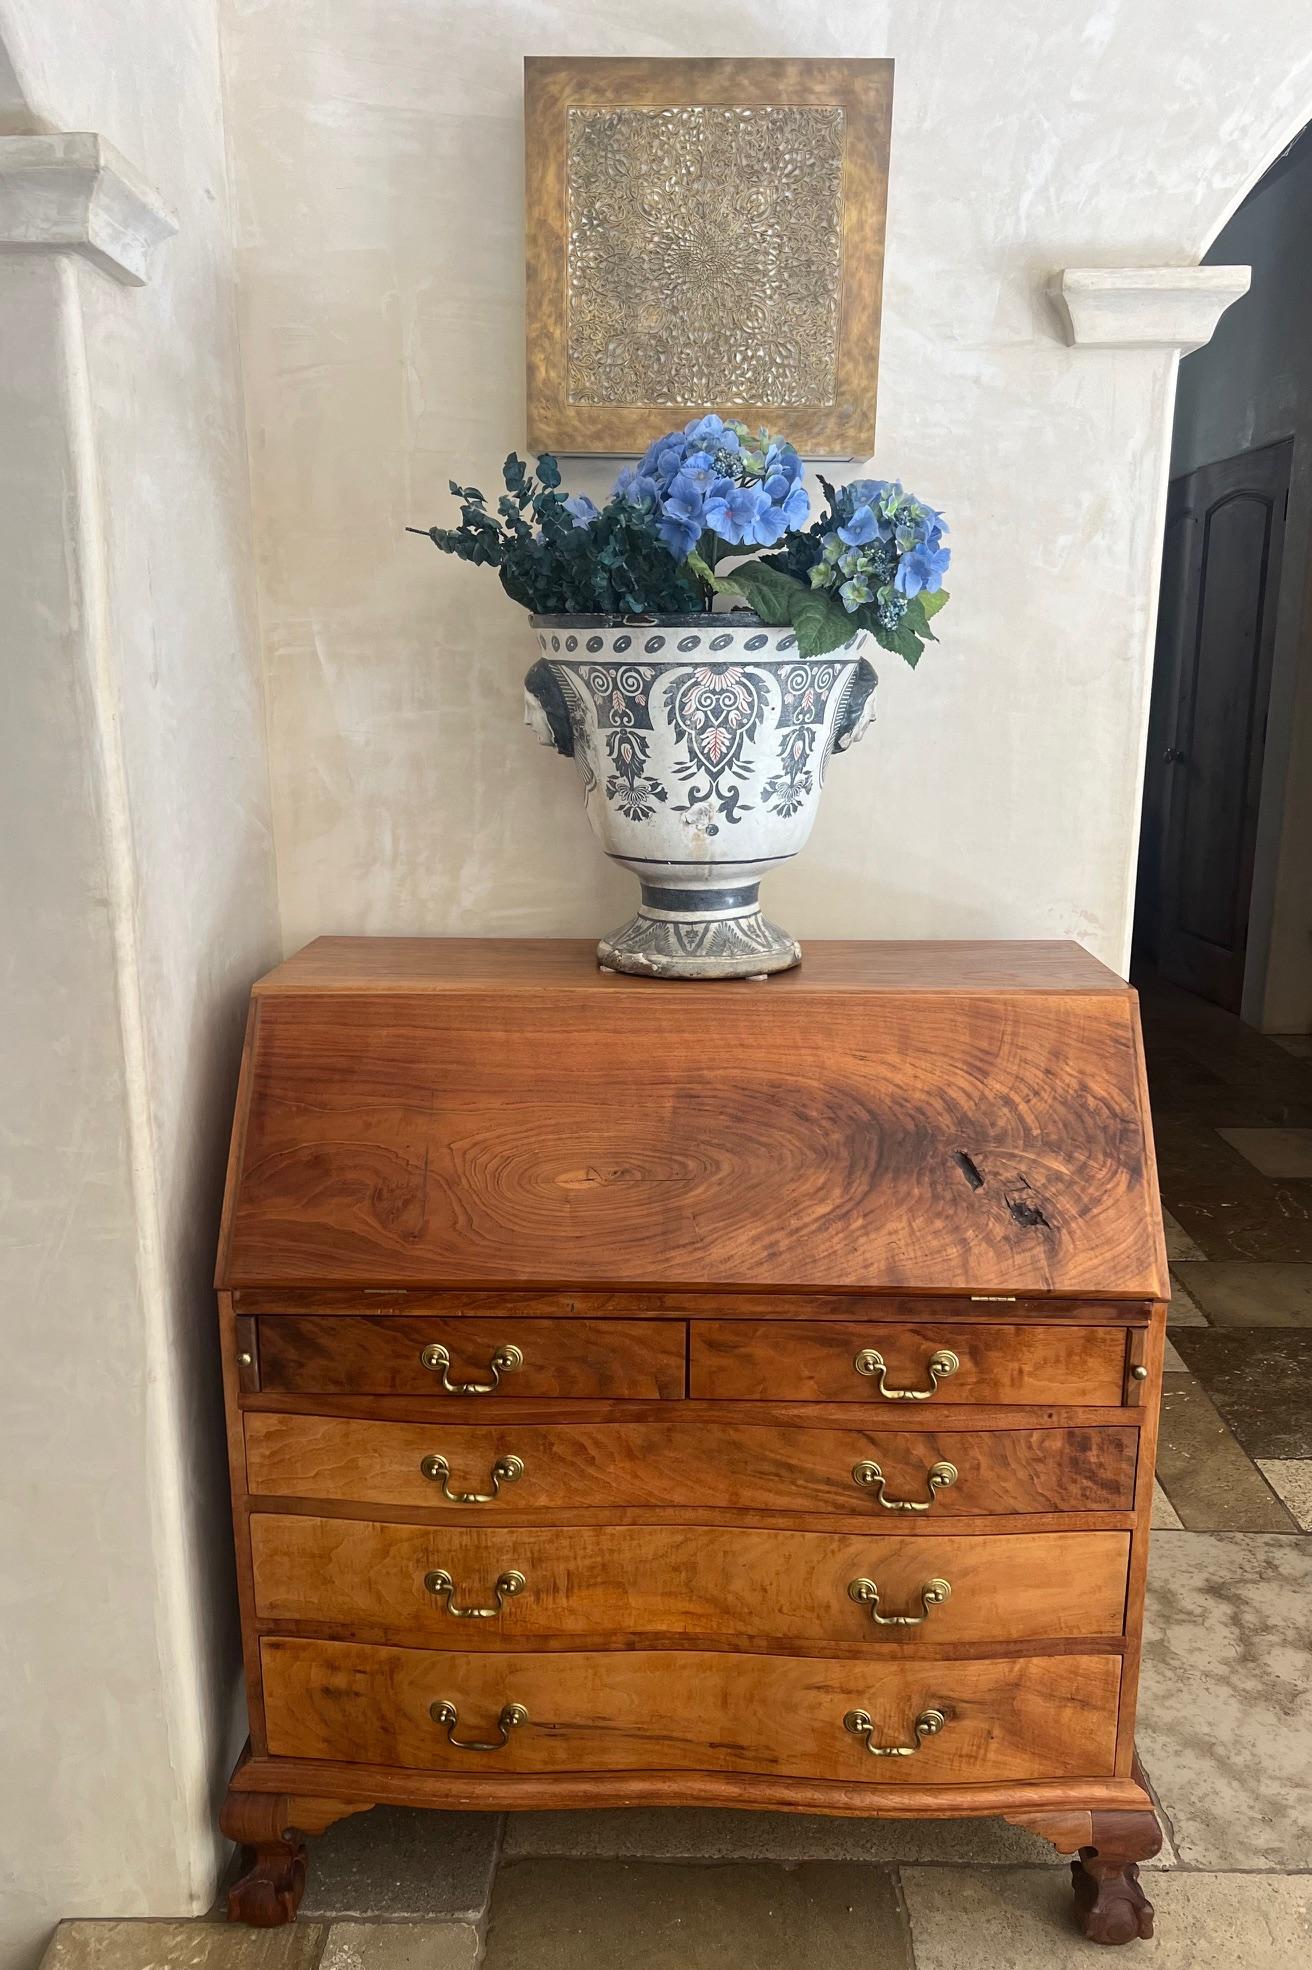 Classic secretary, hand made with ball and claw feet.  The secretary has five drawers with brass pulls on the bottom, with a slant front on top. The slanted top has a knotty feature of the wood. Once open it creates a writing space and includes five